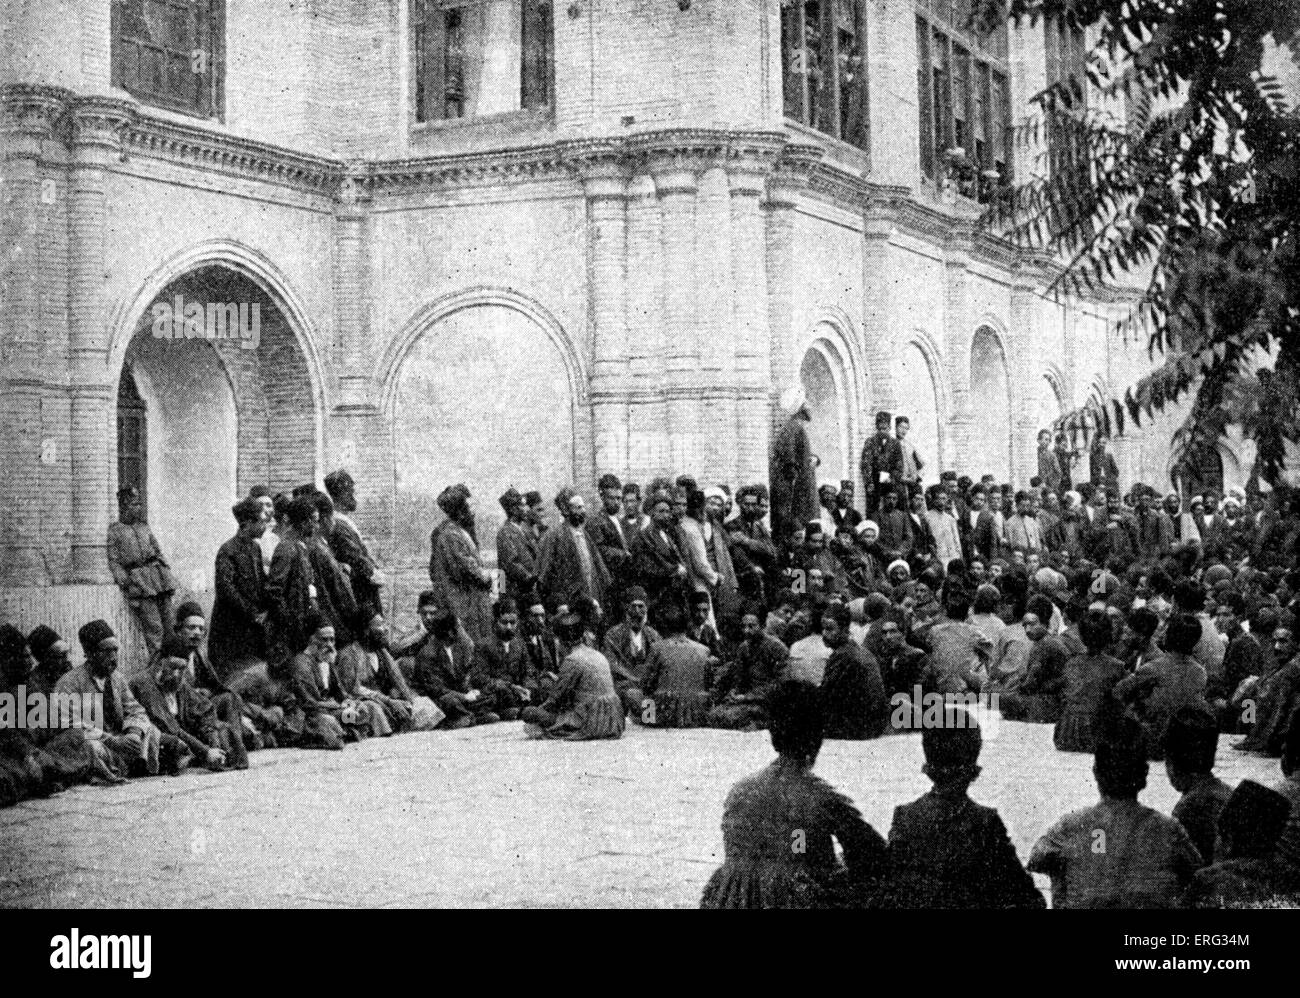 Reading of the Shah 's proclamation to the Persian parliament, Tehran, Iran, 1906. Stock Photo